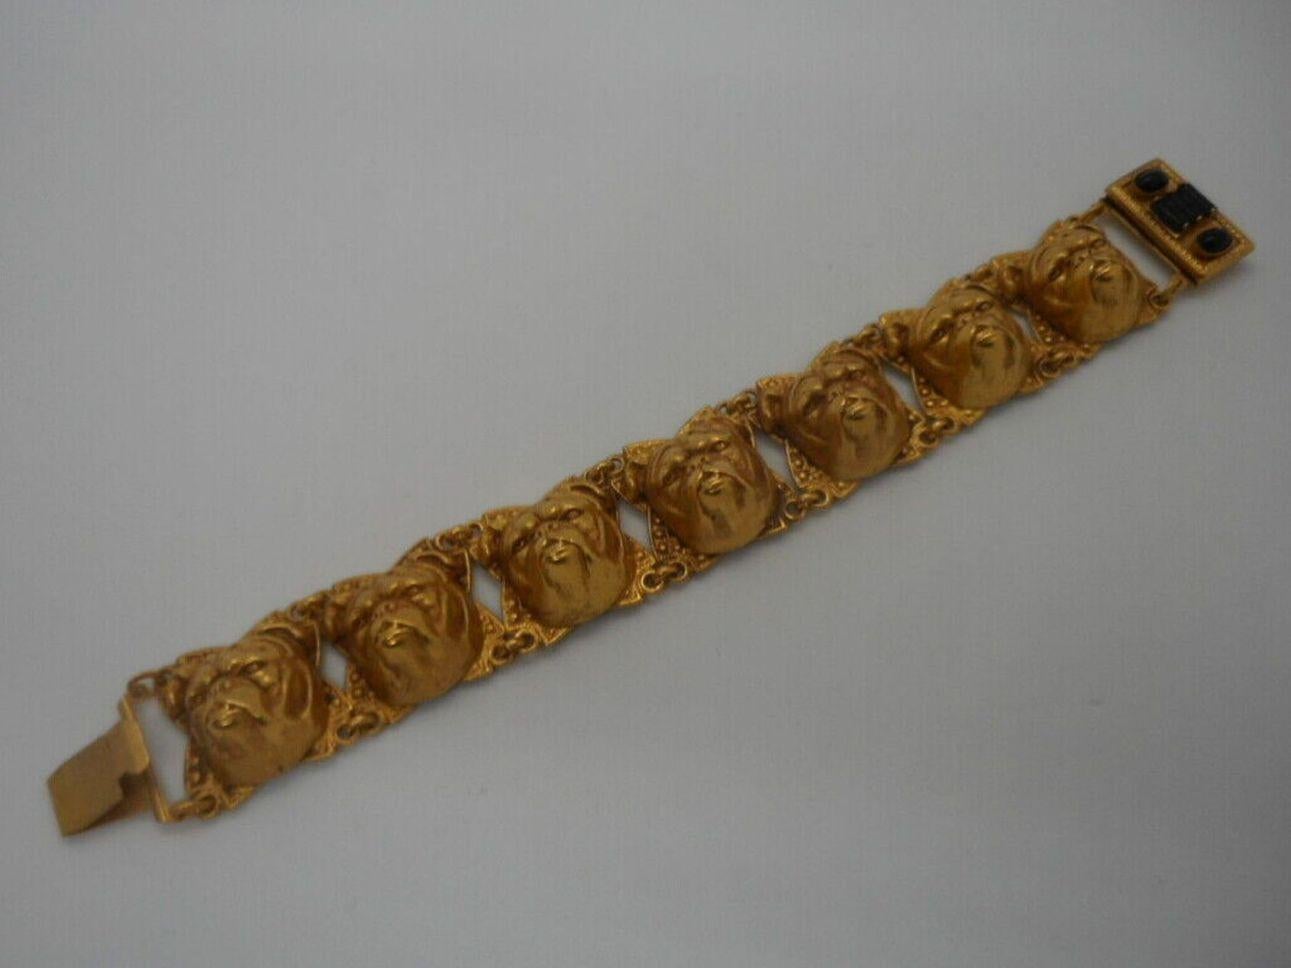 Simply Fabulous! Askew London Signed Bulldog Head Link Bracelet. Antiqued Gold plated ornate Brass bases set with Gilt Brass Bulldog Heads. Bracelet has a wide push-in fastening. Bracelet measures 7.50'' long X 1.00'' wide.  More Beautiful in real